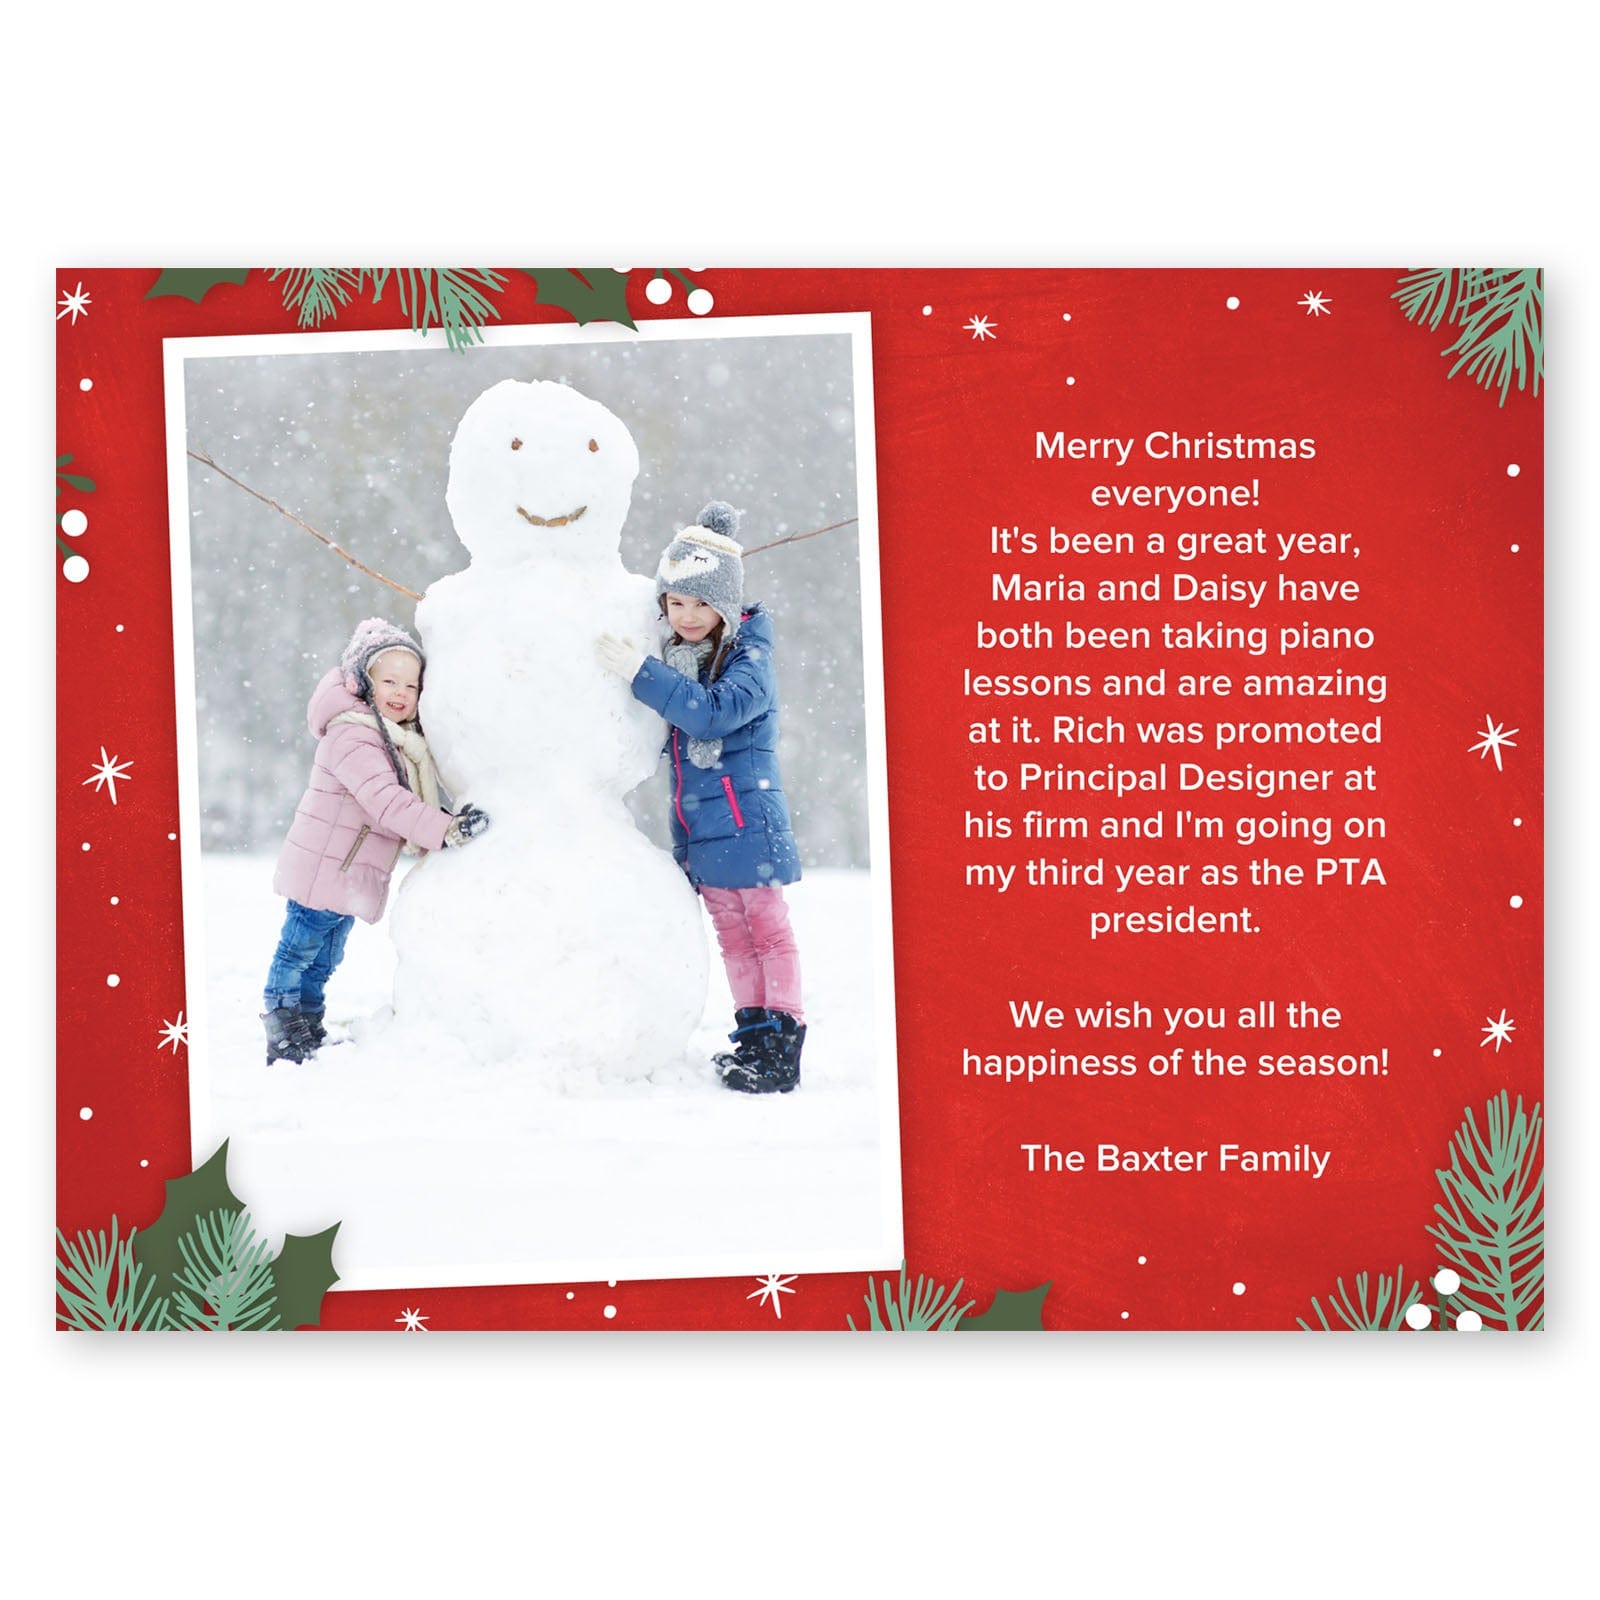 Merry Christmas Sprigs holiday card